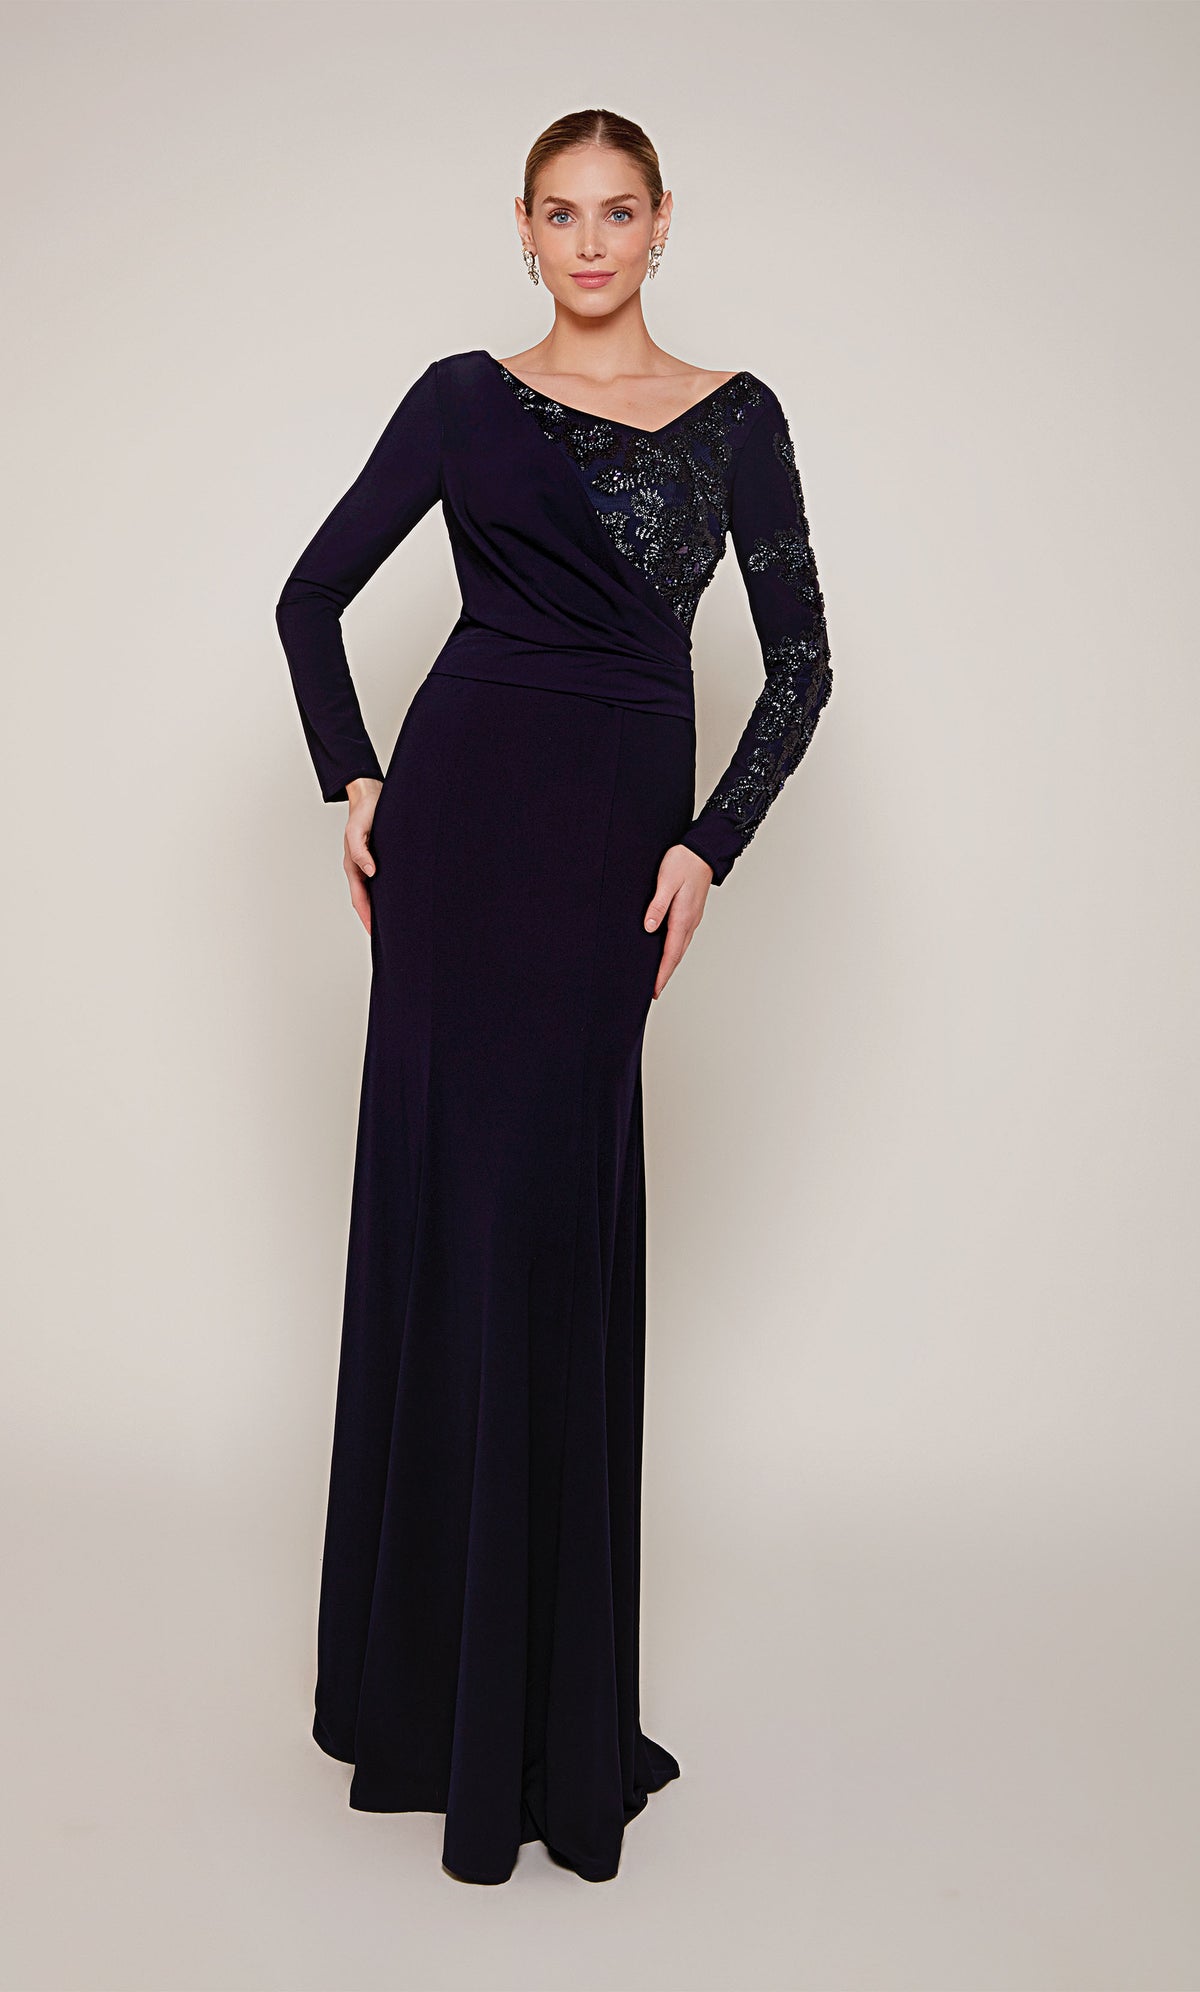 A navy long sleeve mother of the bride dress with an off center V-neckline and silver beaded detail on the left side of the bodice and sleeve.